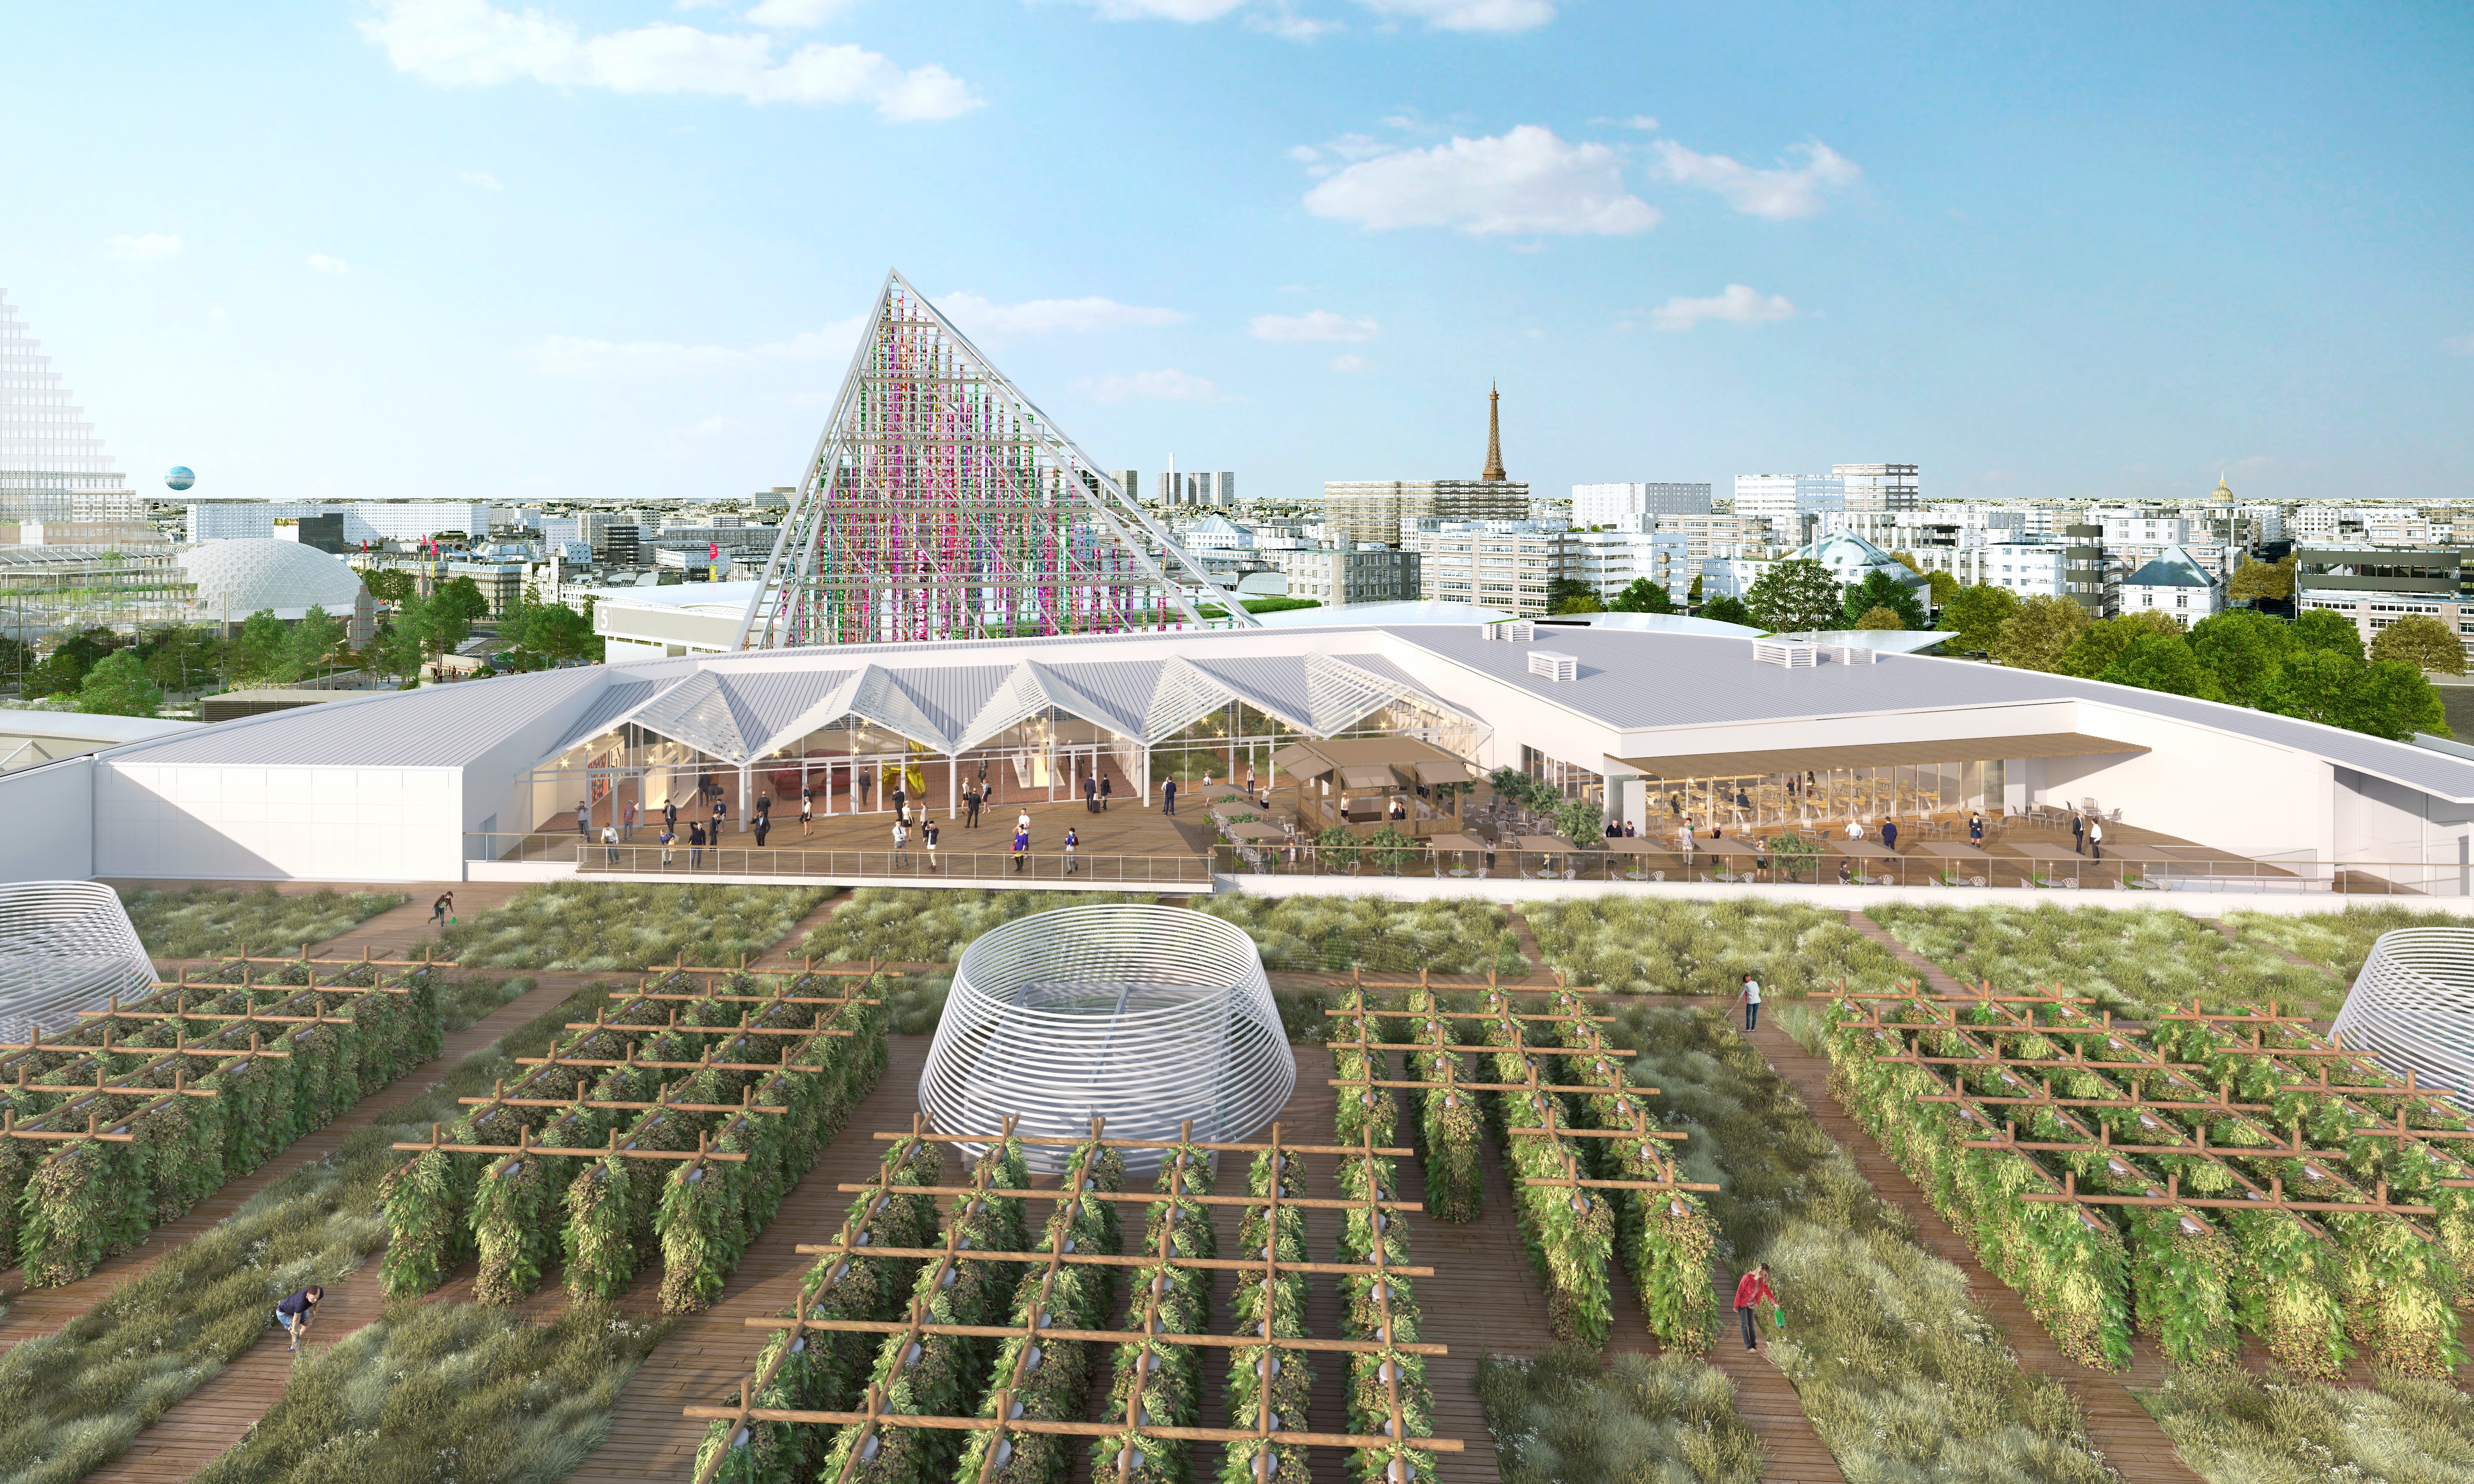 Paris will soon be home to the world's largest urban rooftop farm